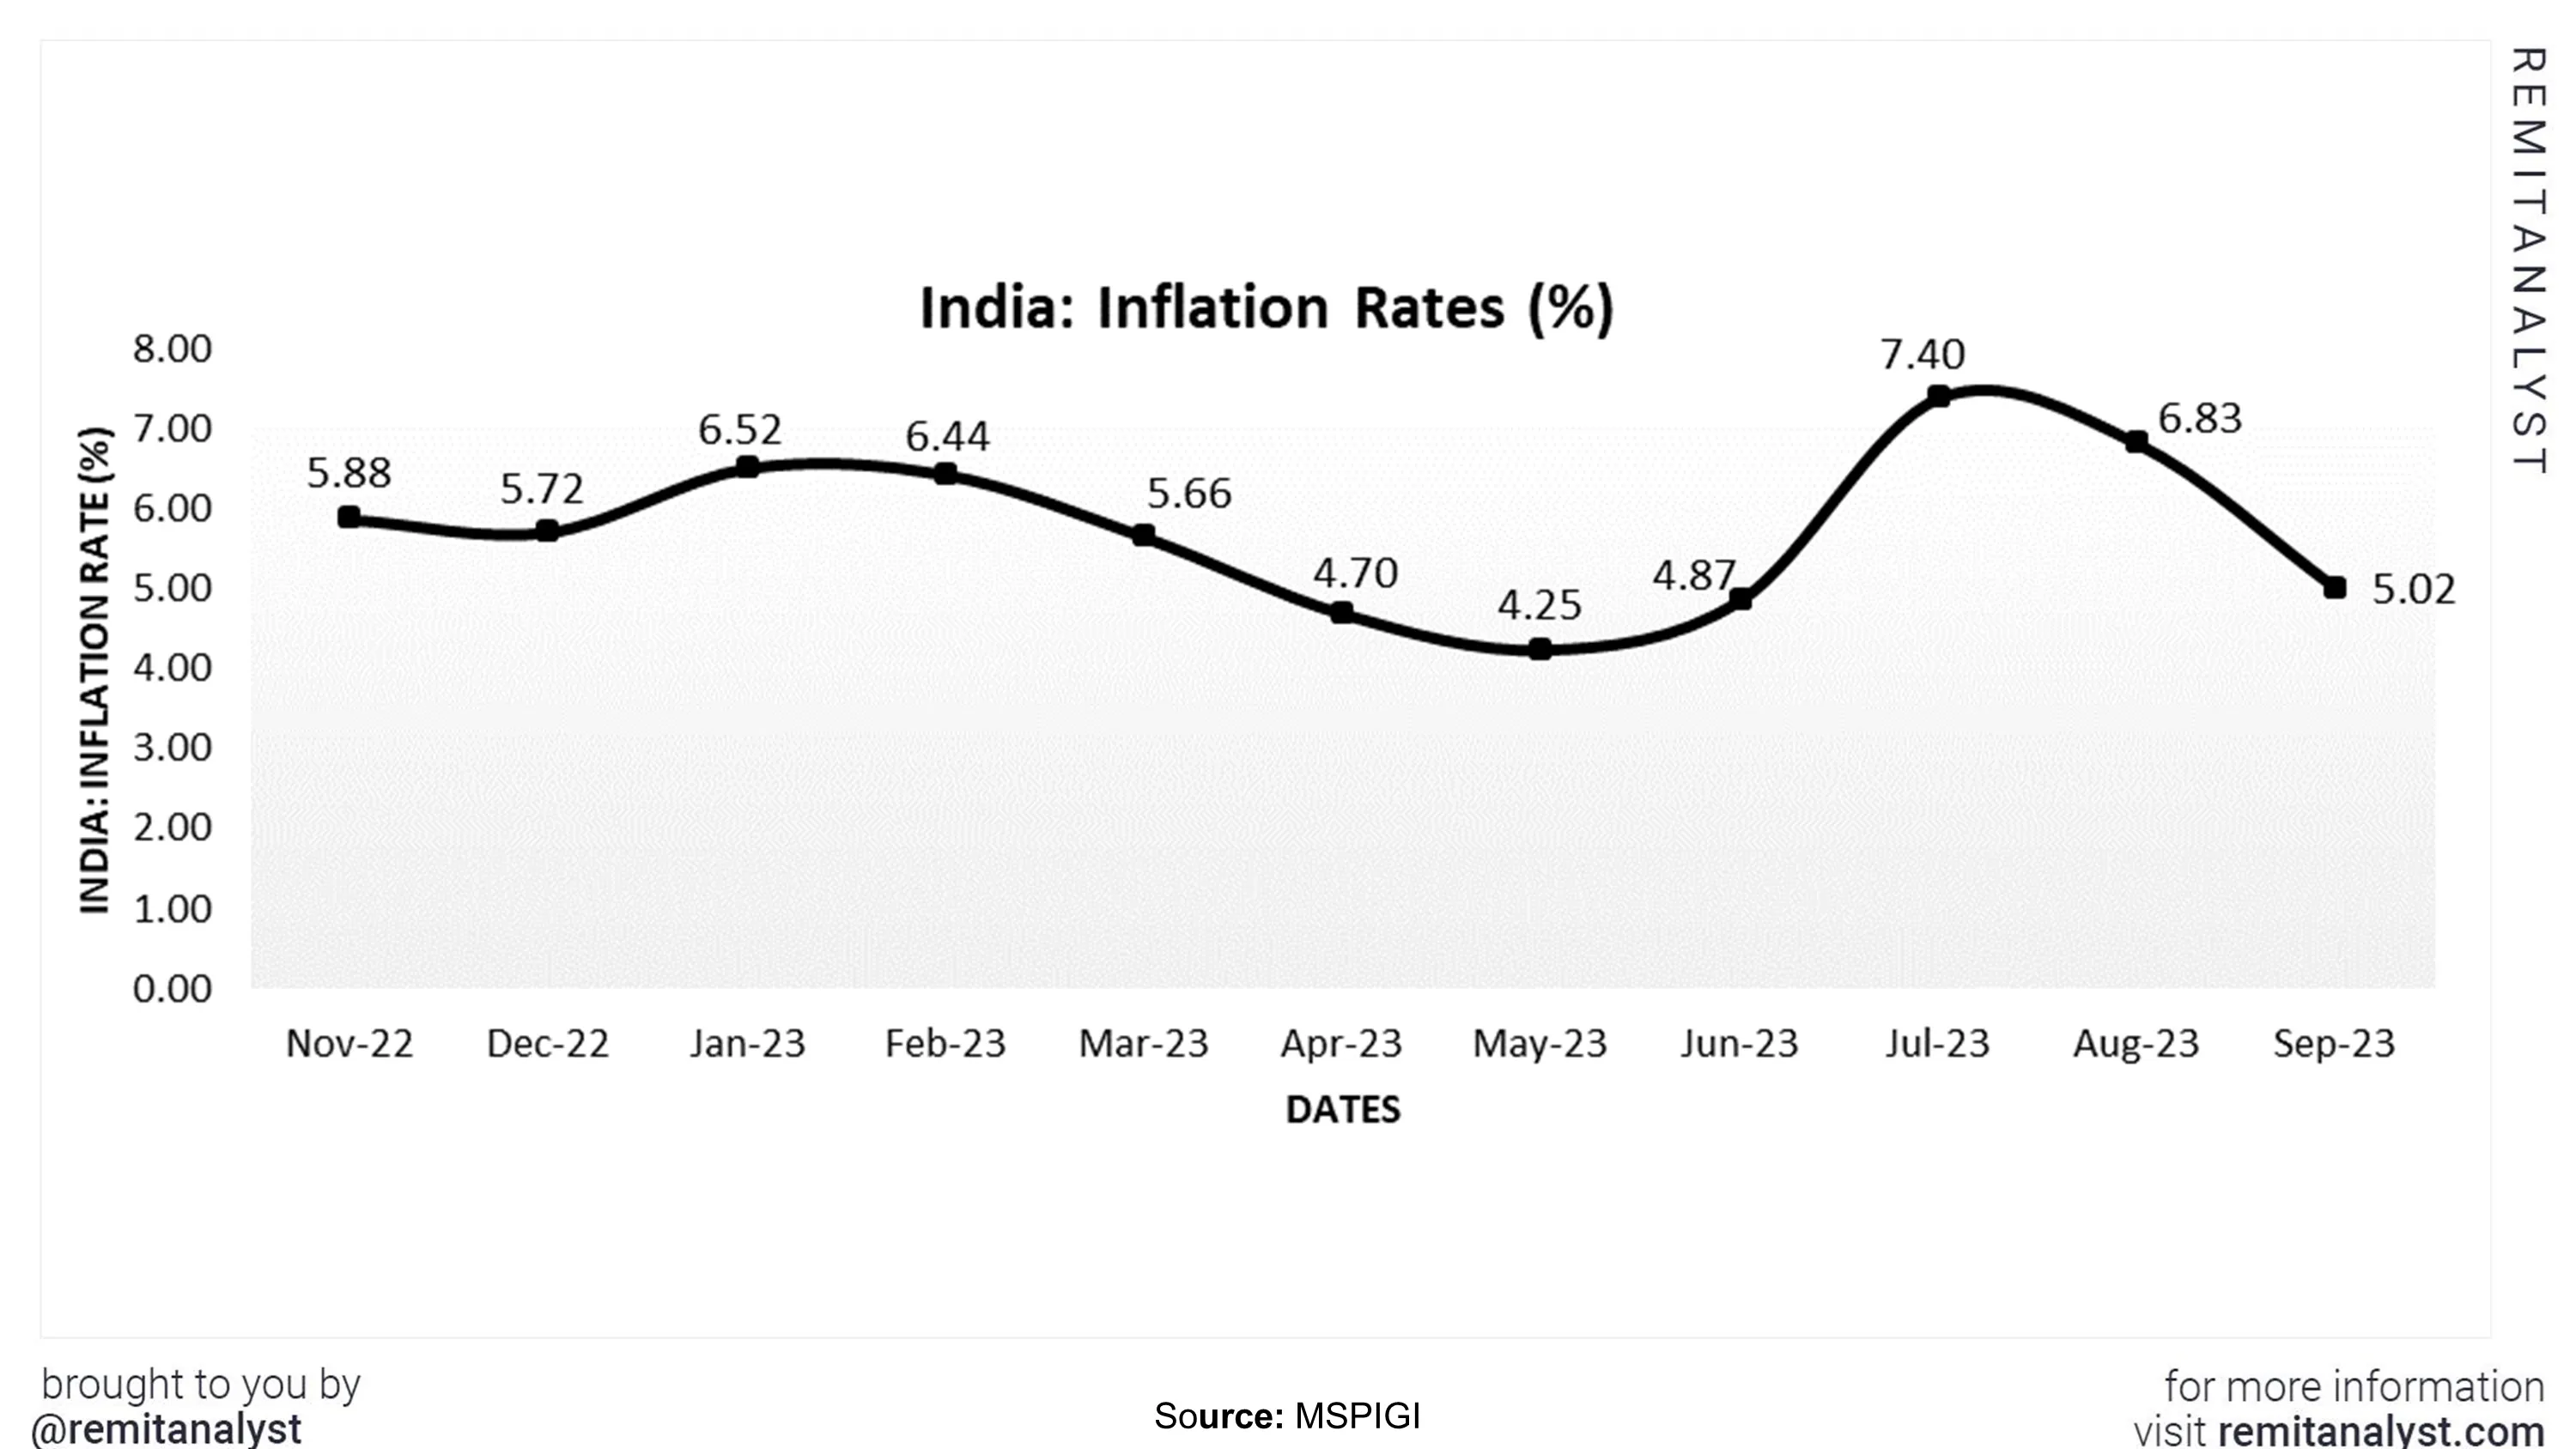 inflation-rates-in-india-from-nov-2022-to-sep-2023